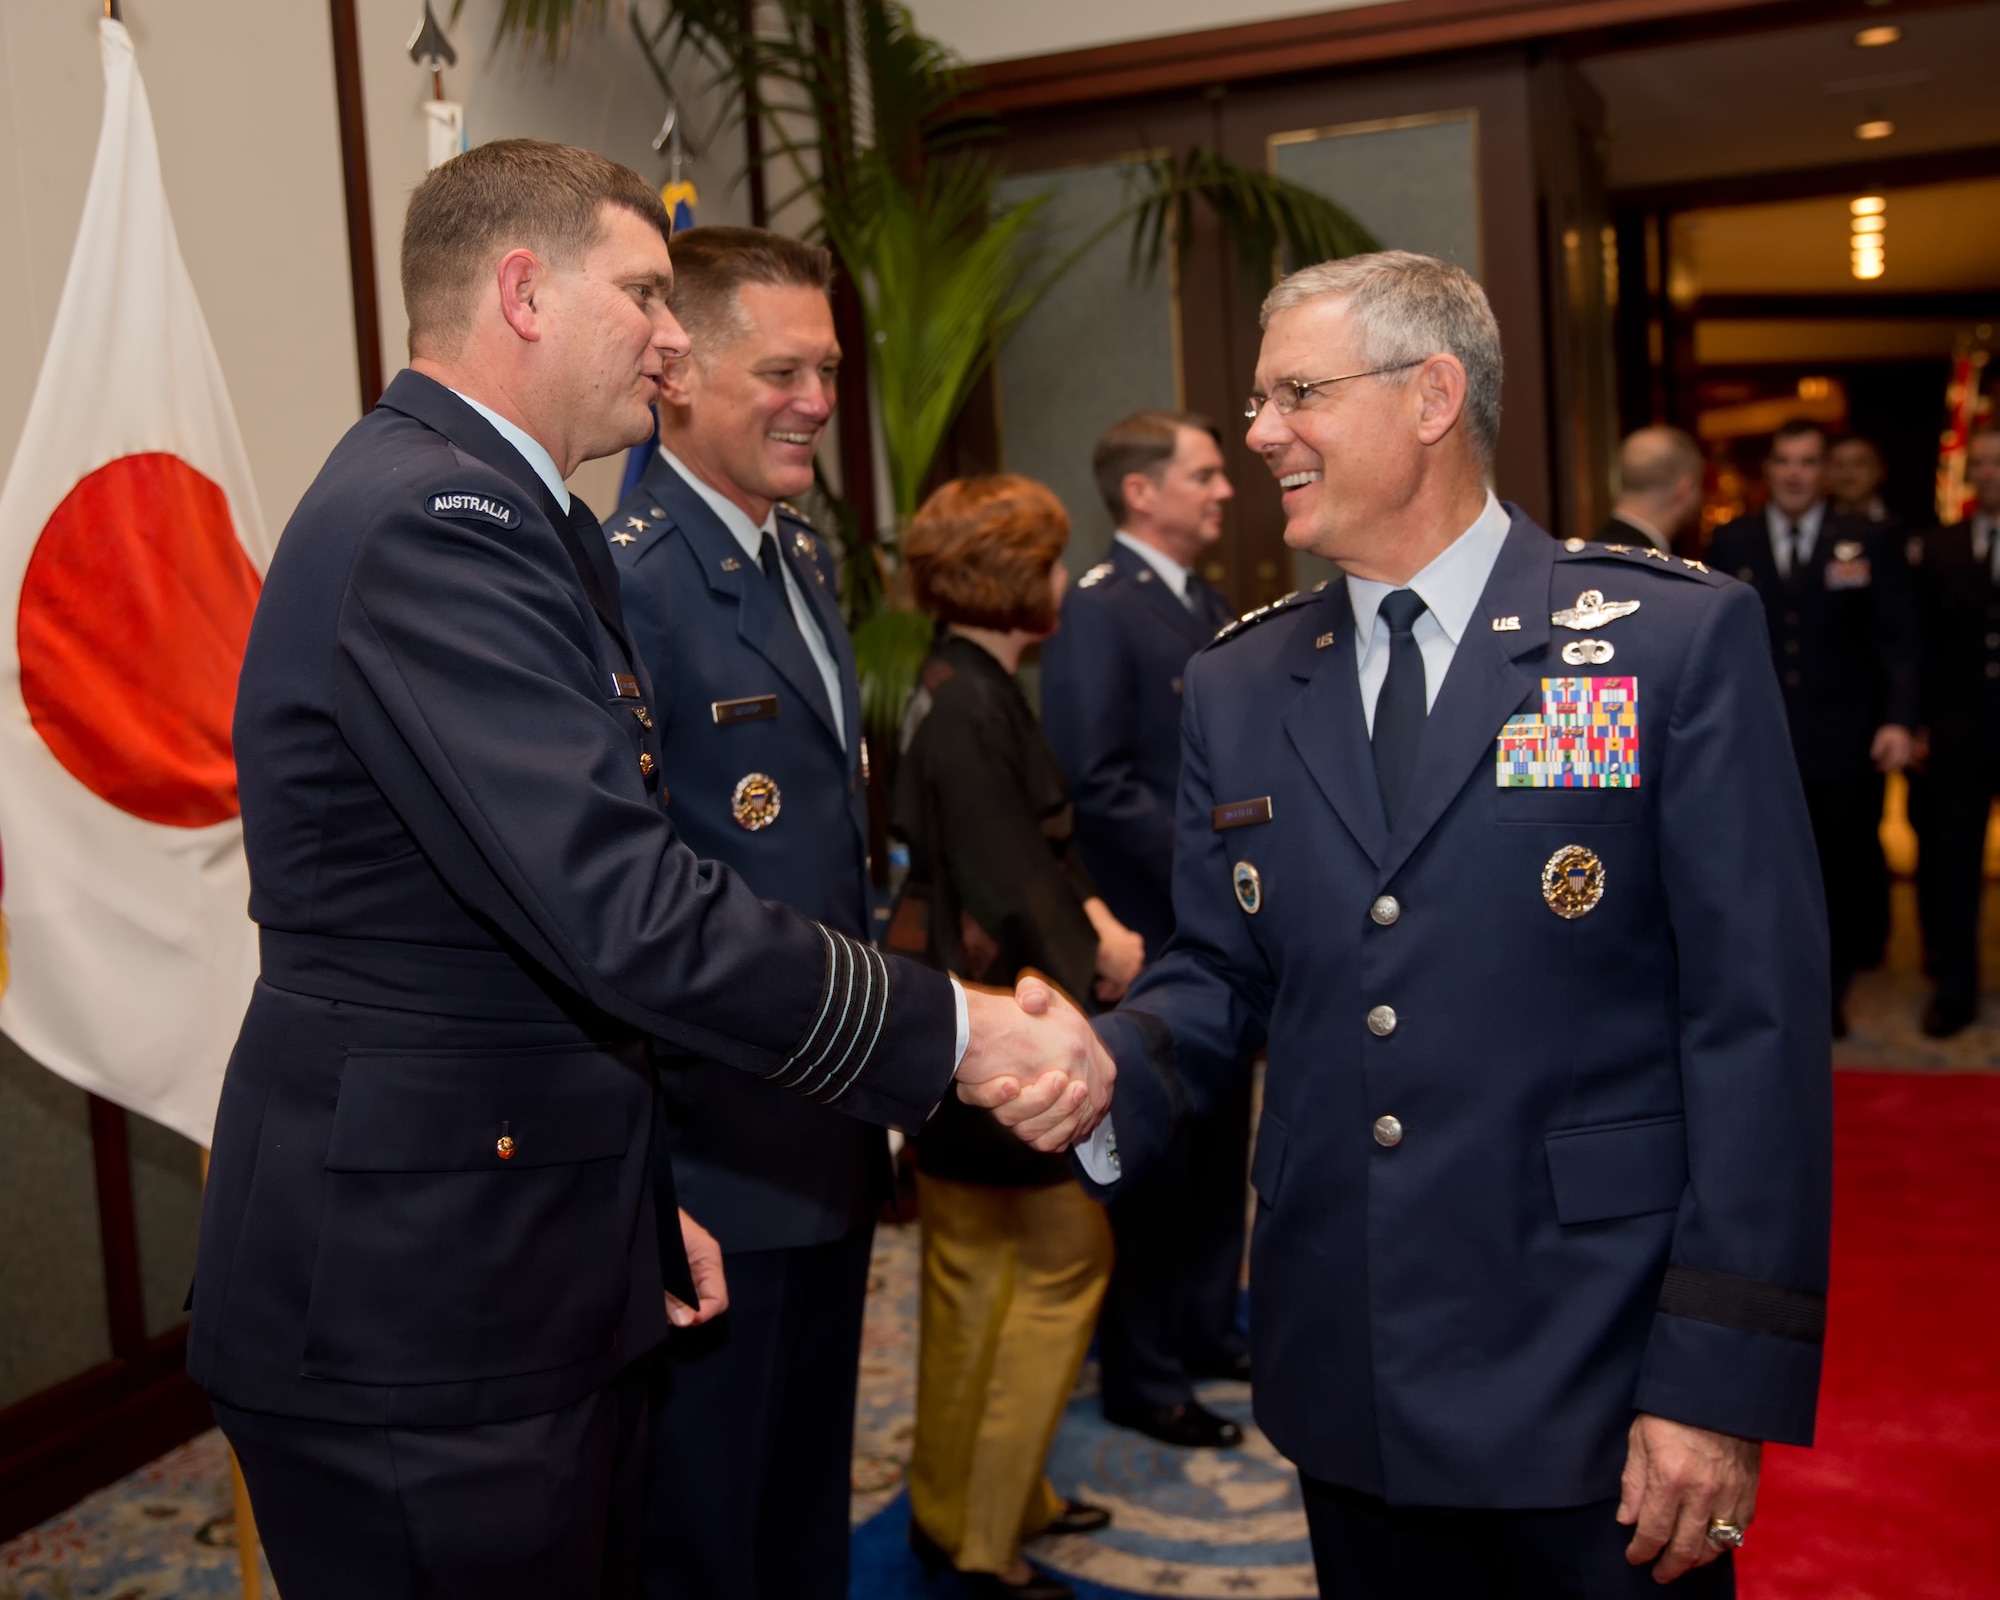 TOKYO, Japan -- (from left to right) Royal Australian Air Force Group Captain Luke Stoodley, United Nations Command (Rear) commander, greets U.S. Air Force Lt. Gen. Sam Angelella, U.S. Forces, Japan and 5th Air Force commander, during the 67th Anniversary of the United Nations, Nov. 29, 2012 at New Sanno Hotel. The United Nations Command (Rear) provides liaison and maintains a special UN Forces - Government of Japan Status of Forces Agreement which enables forces of UN member nations to use seven U.S. installations in Japan as UNC supporting facilities in the event of a resumption of hostilities. (U.S. Air Force photo by Osakabe Yasuo)